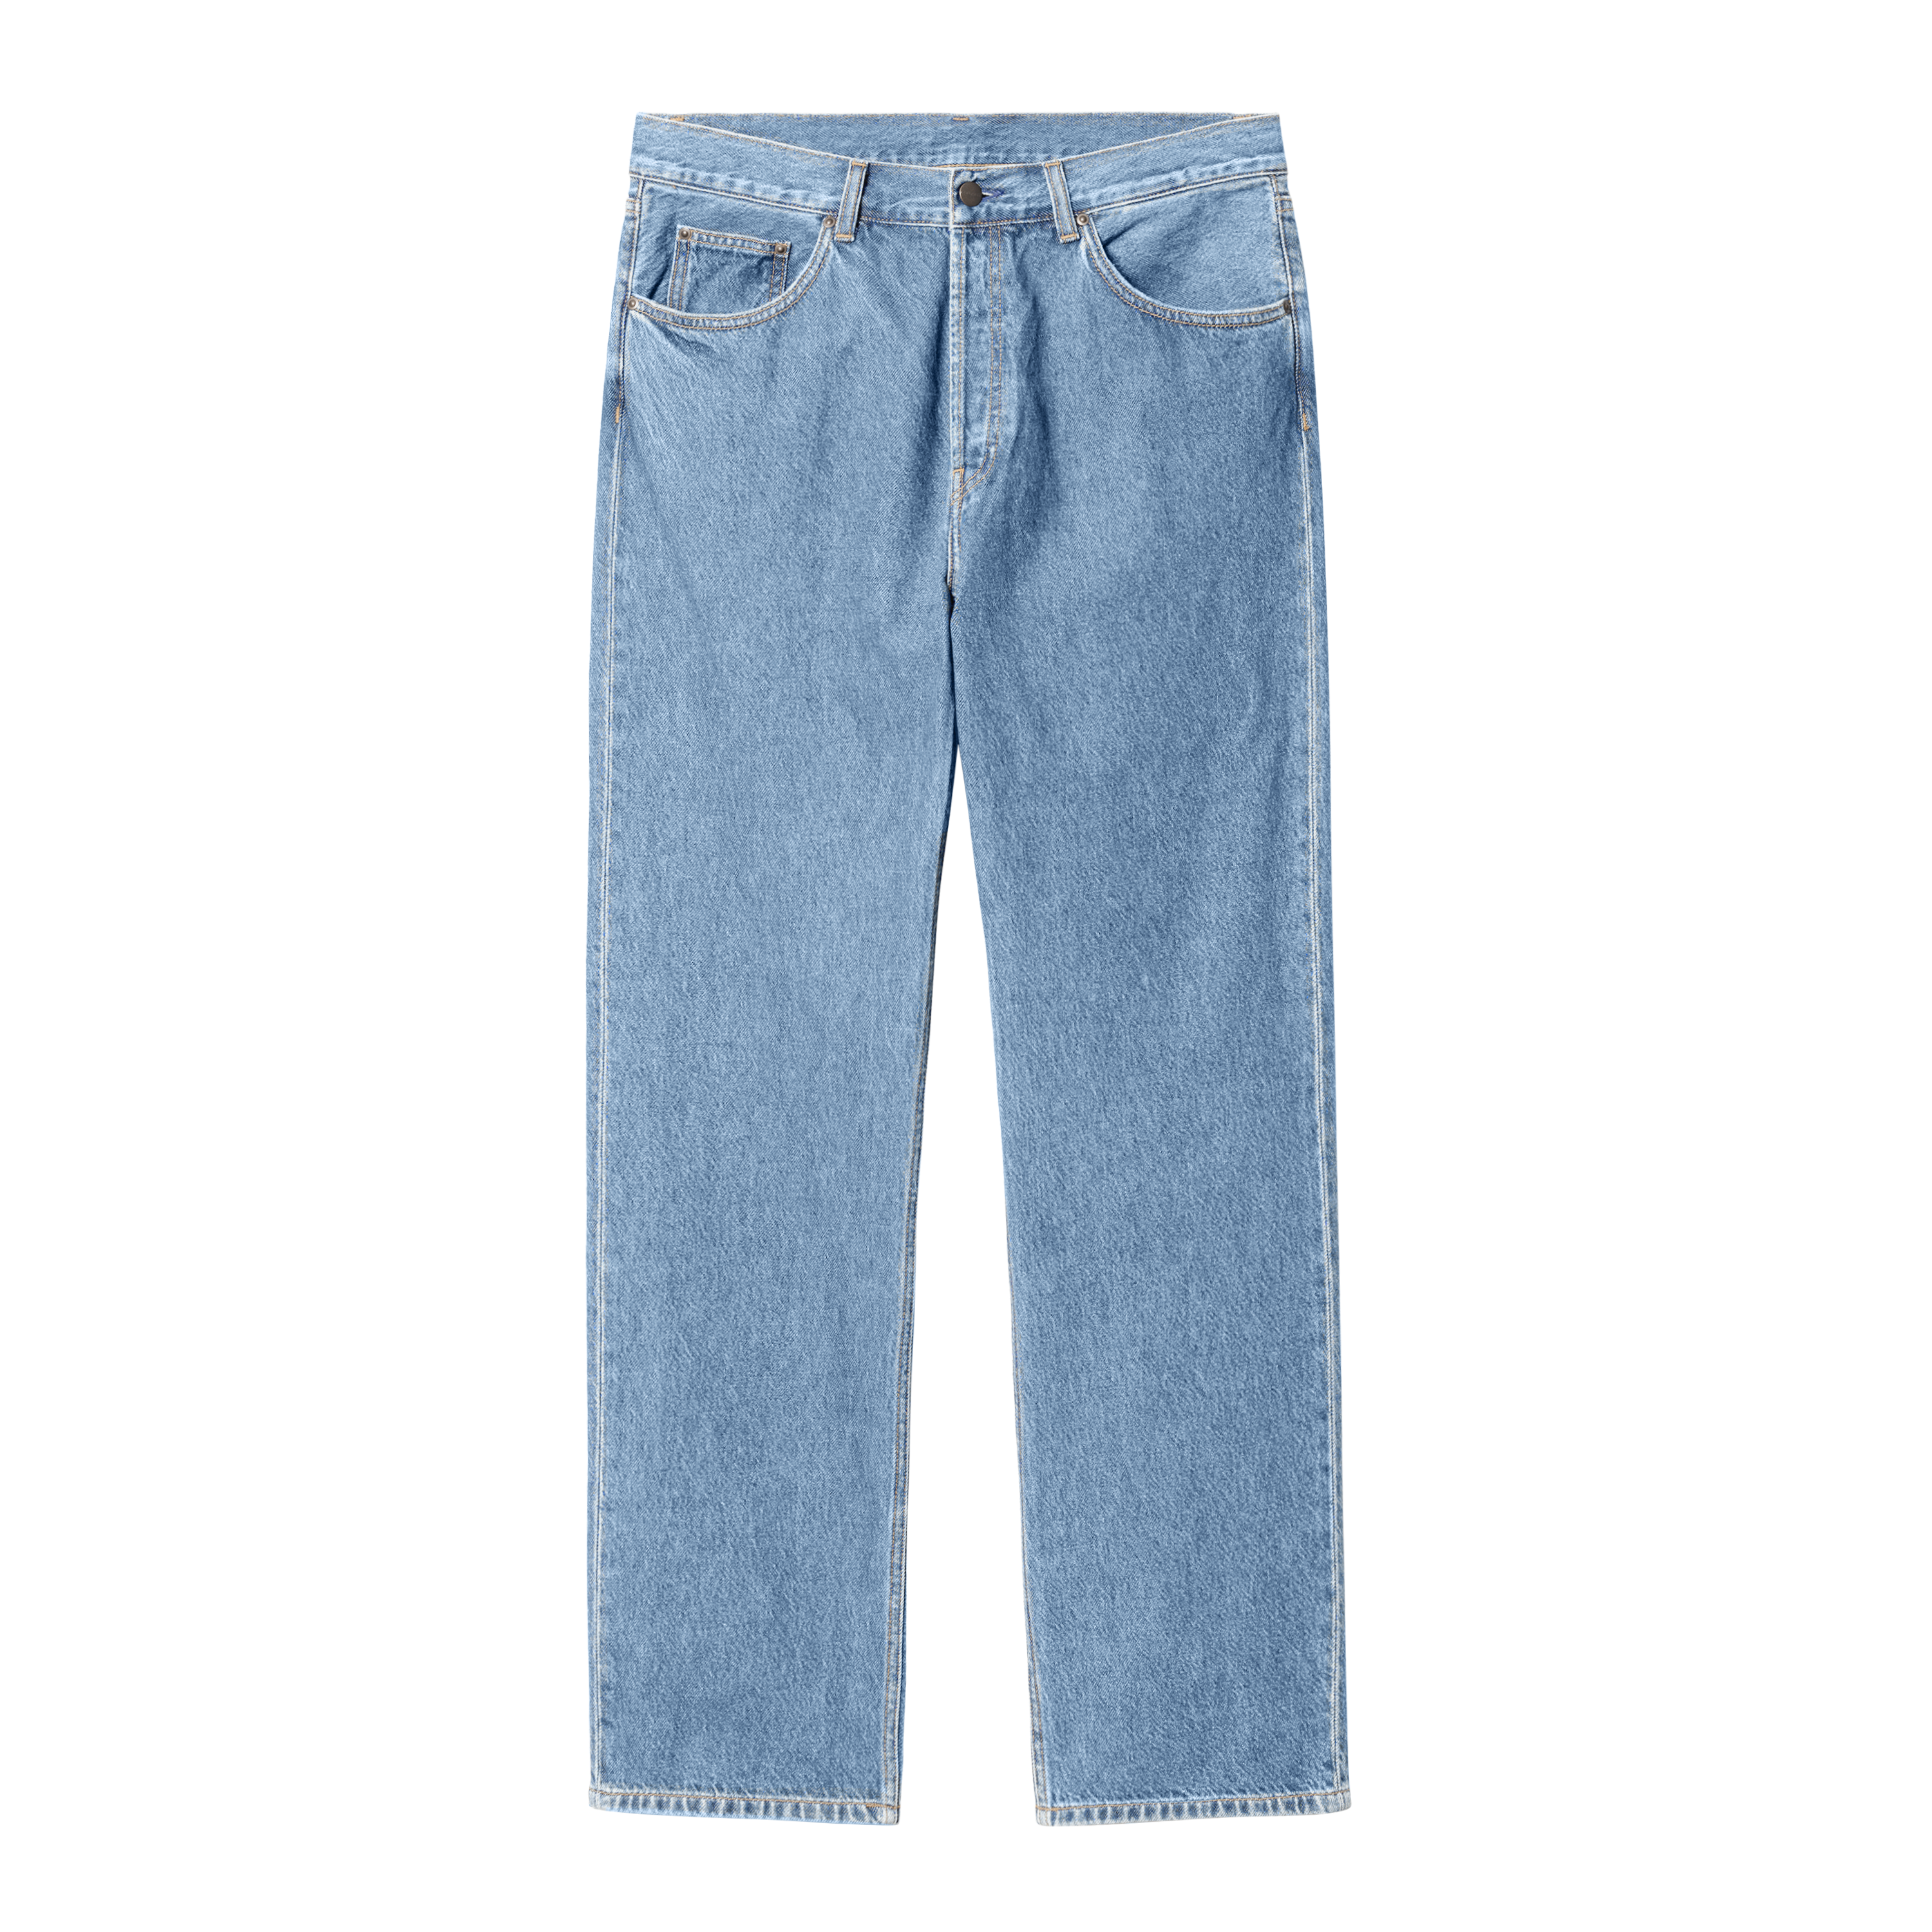 Carhartt WIP - NOLAN PANT - Blue (Heavy Stone Washed)